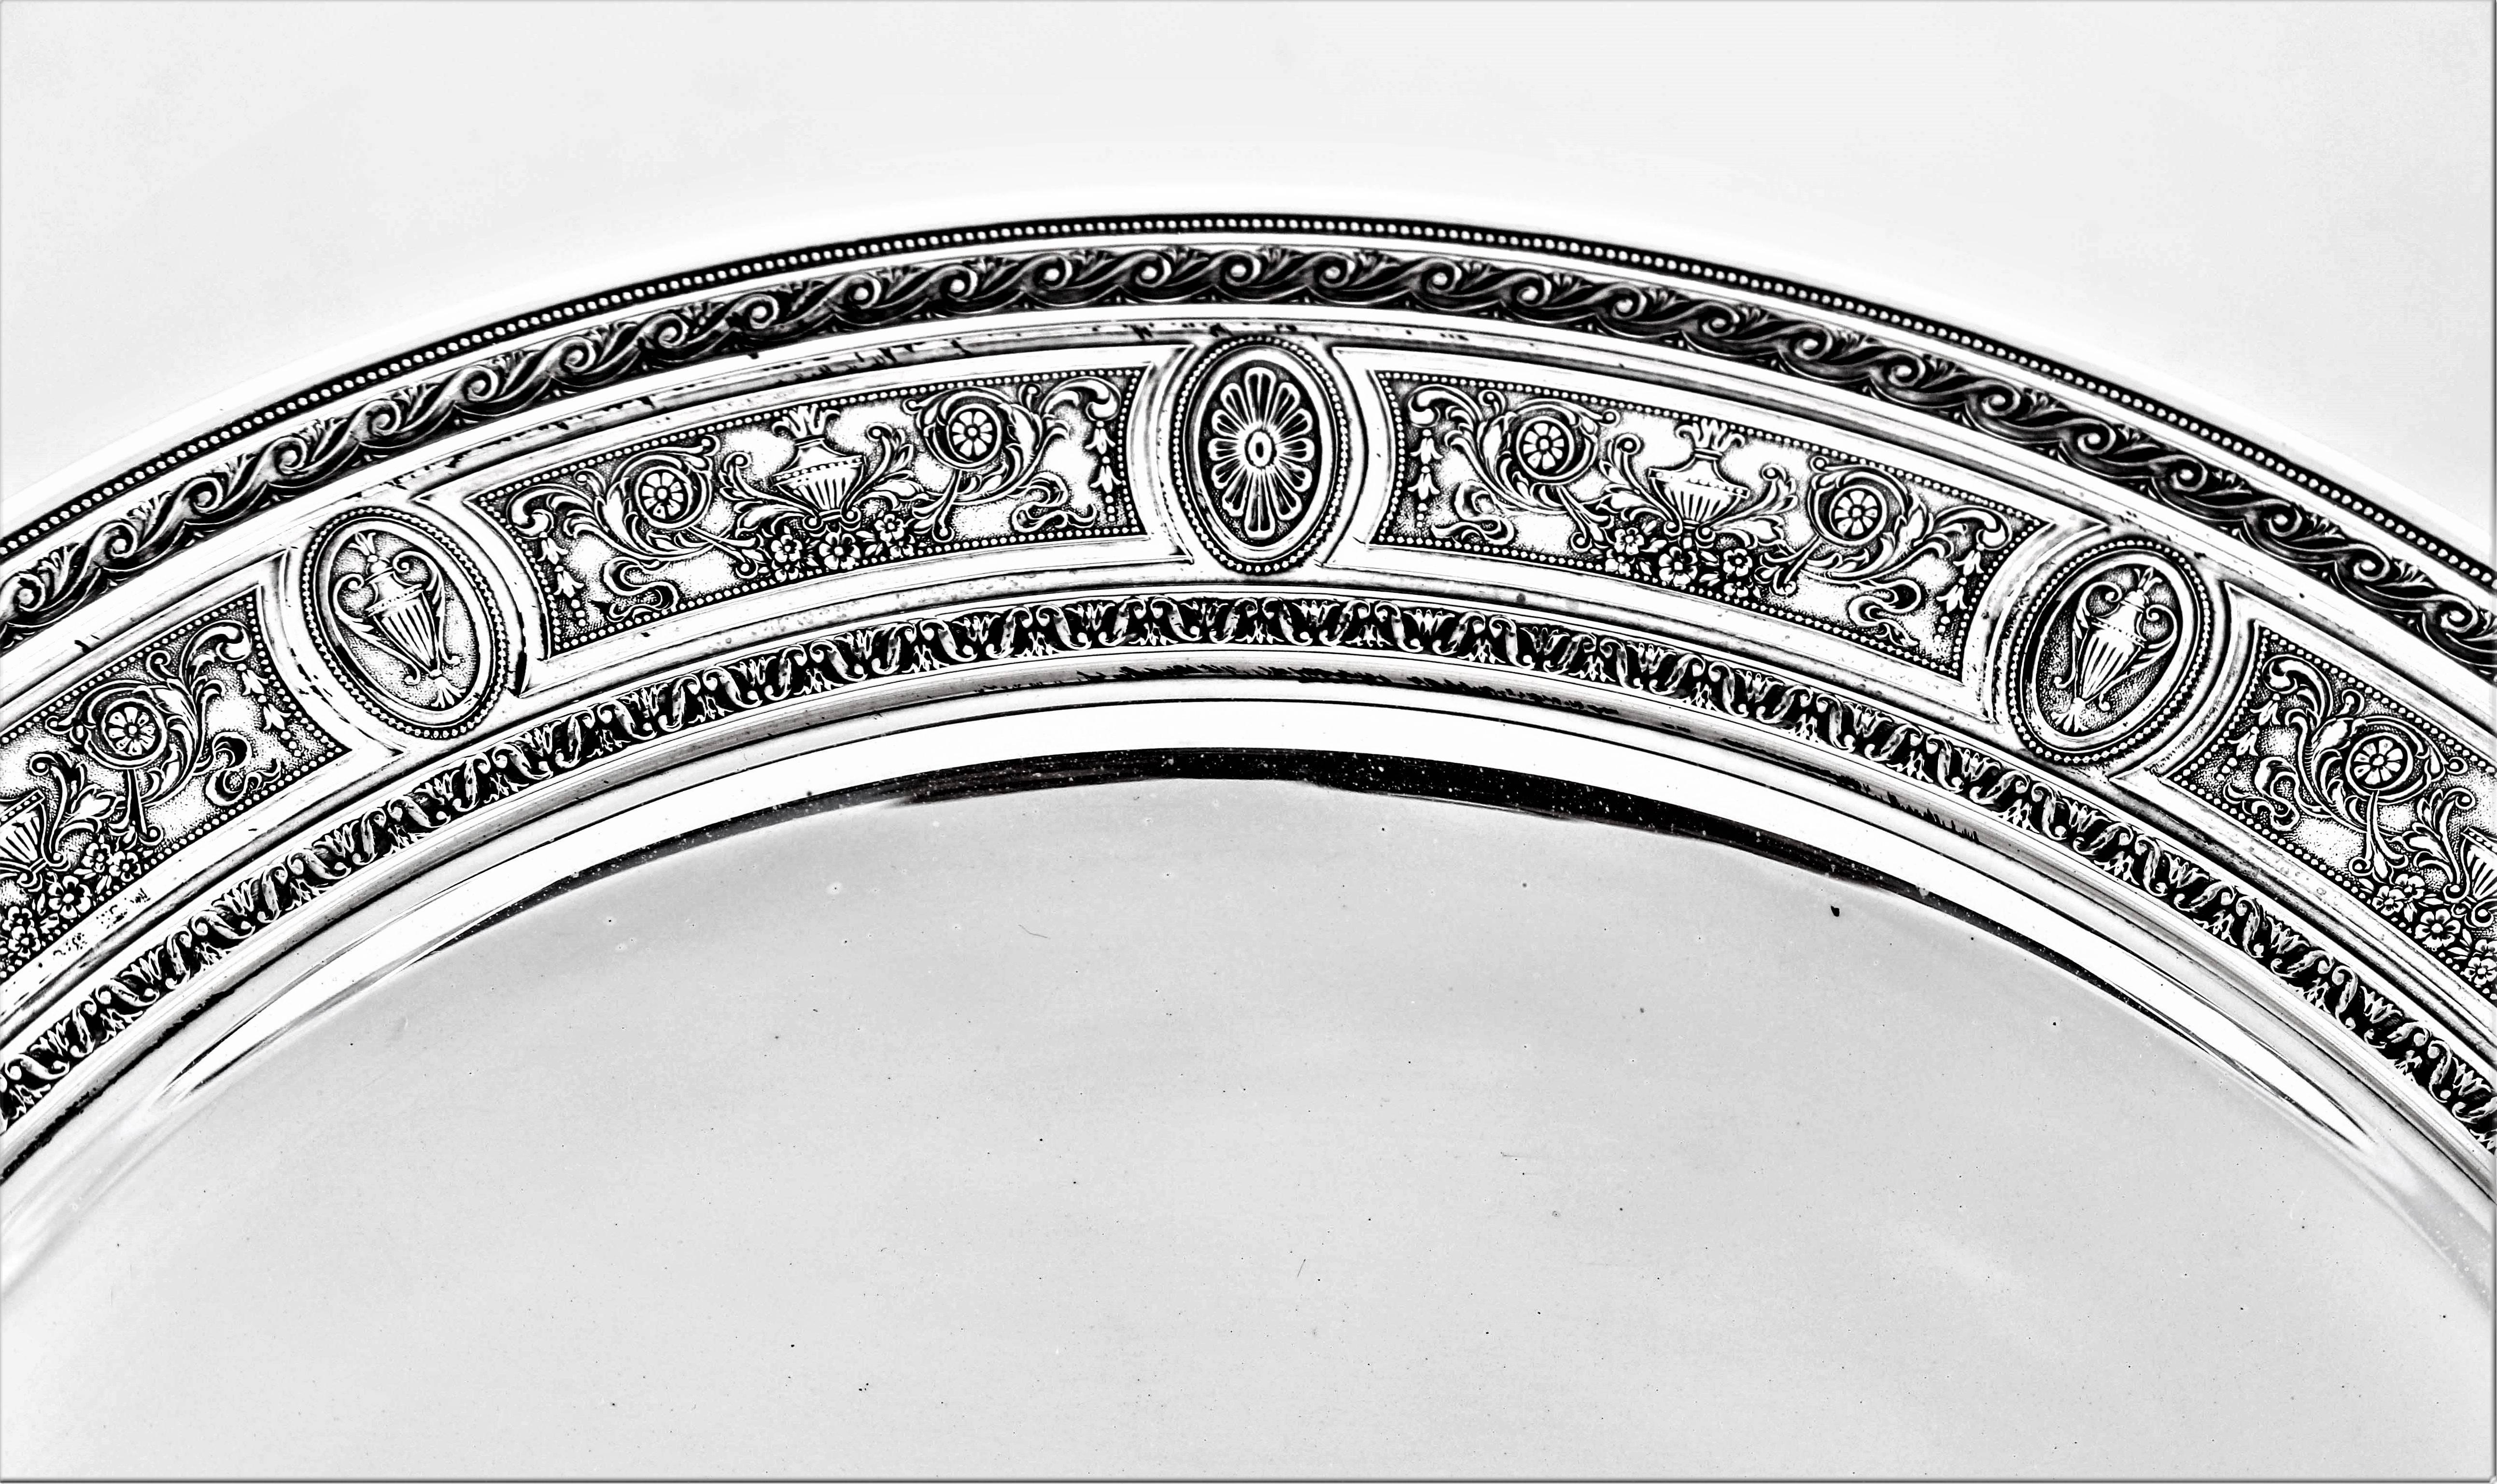 The Wedgewood pattern by International Silver is iconic. There are urns and medallions alternating throughout. Intermittently molding decor connects the two together. It was so popular as a flatware design that it was later made for hollowware. Tea